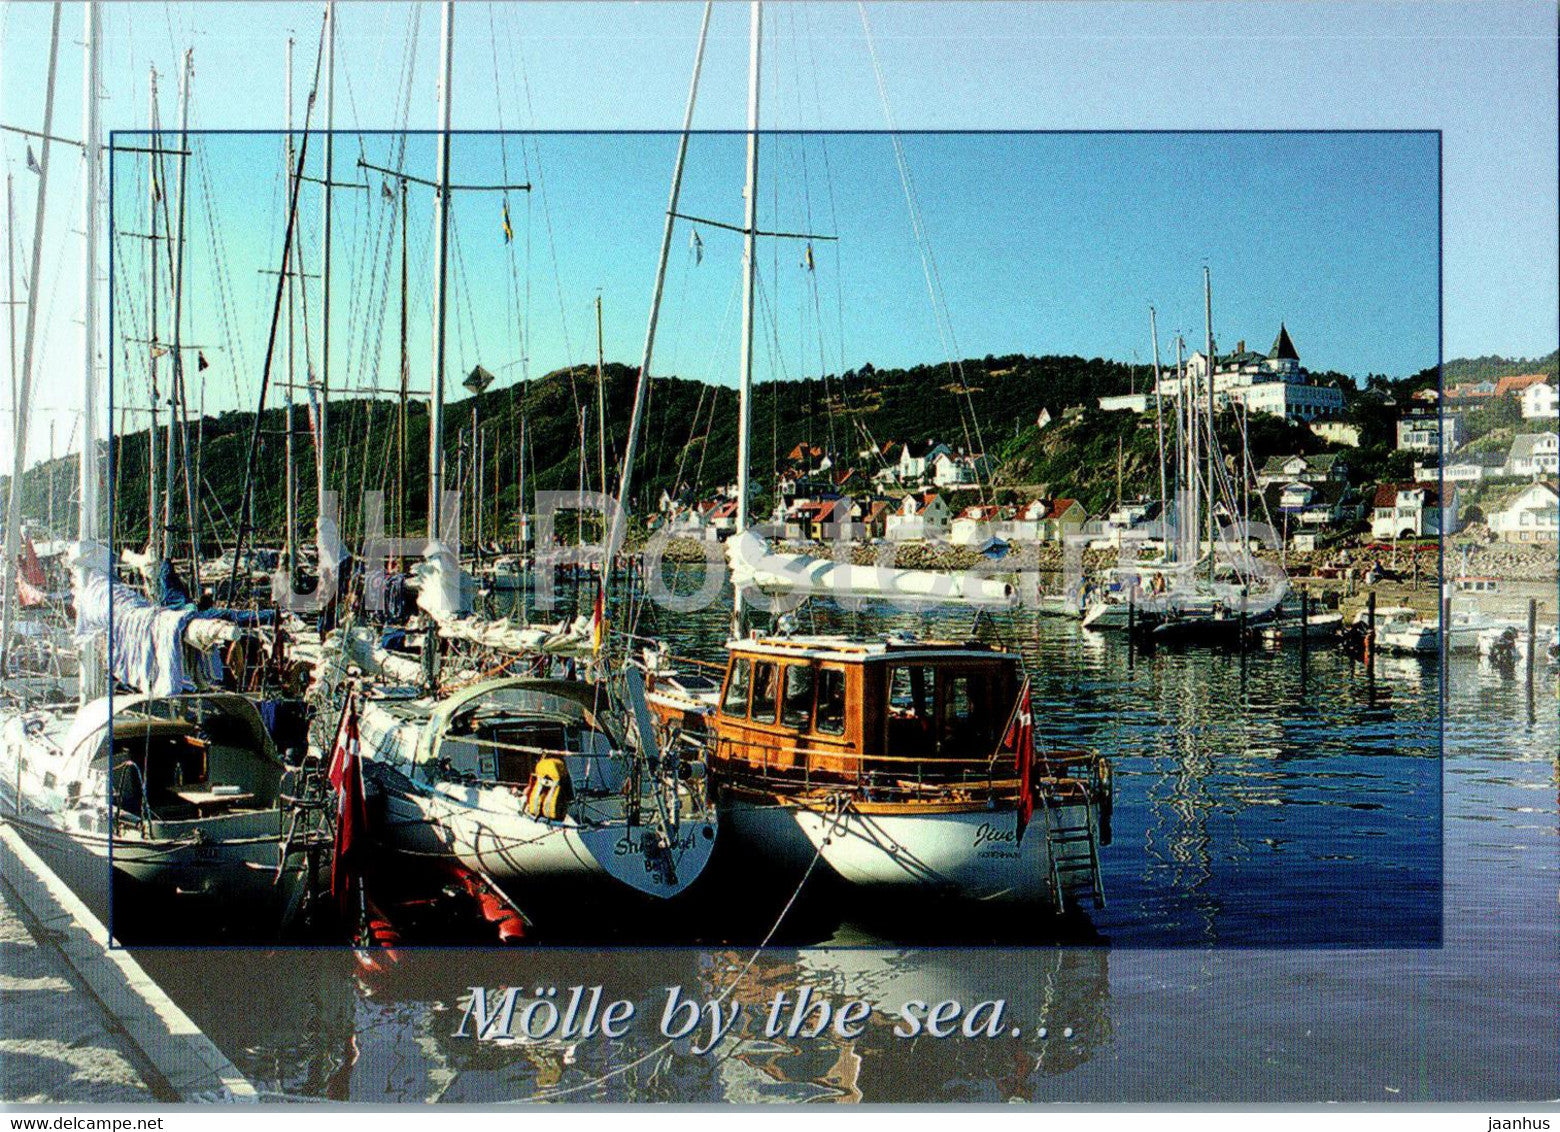 Molle by the sea - boat - yacht - 1304 - Sweden - unused - JH Postcards